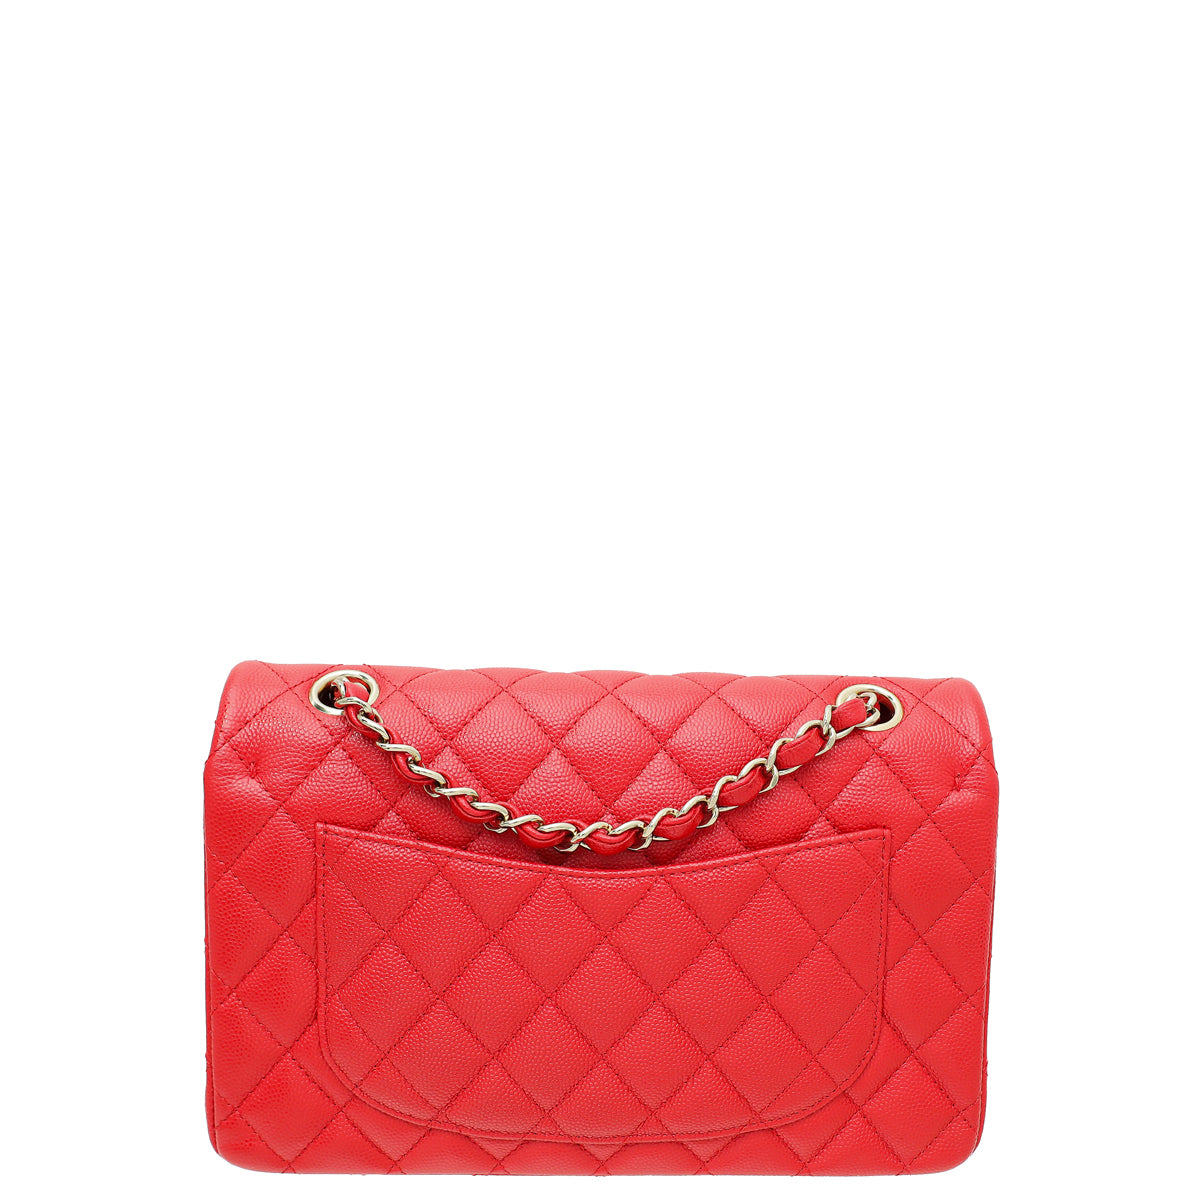 Chanel Red CC Classic Double Flap Small Bag